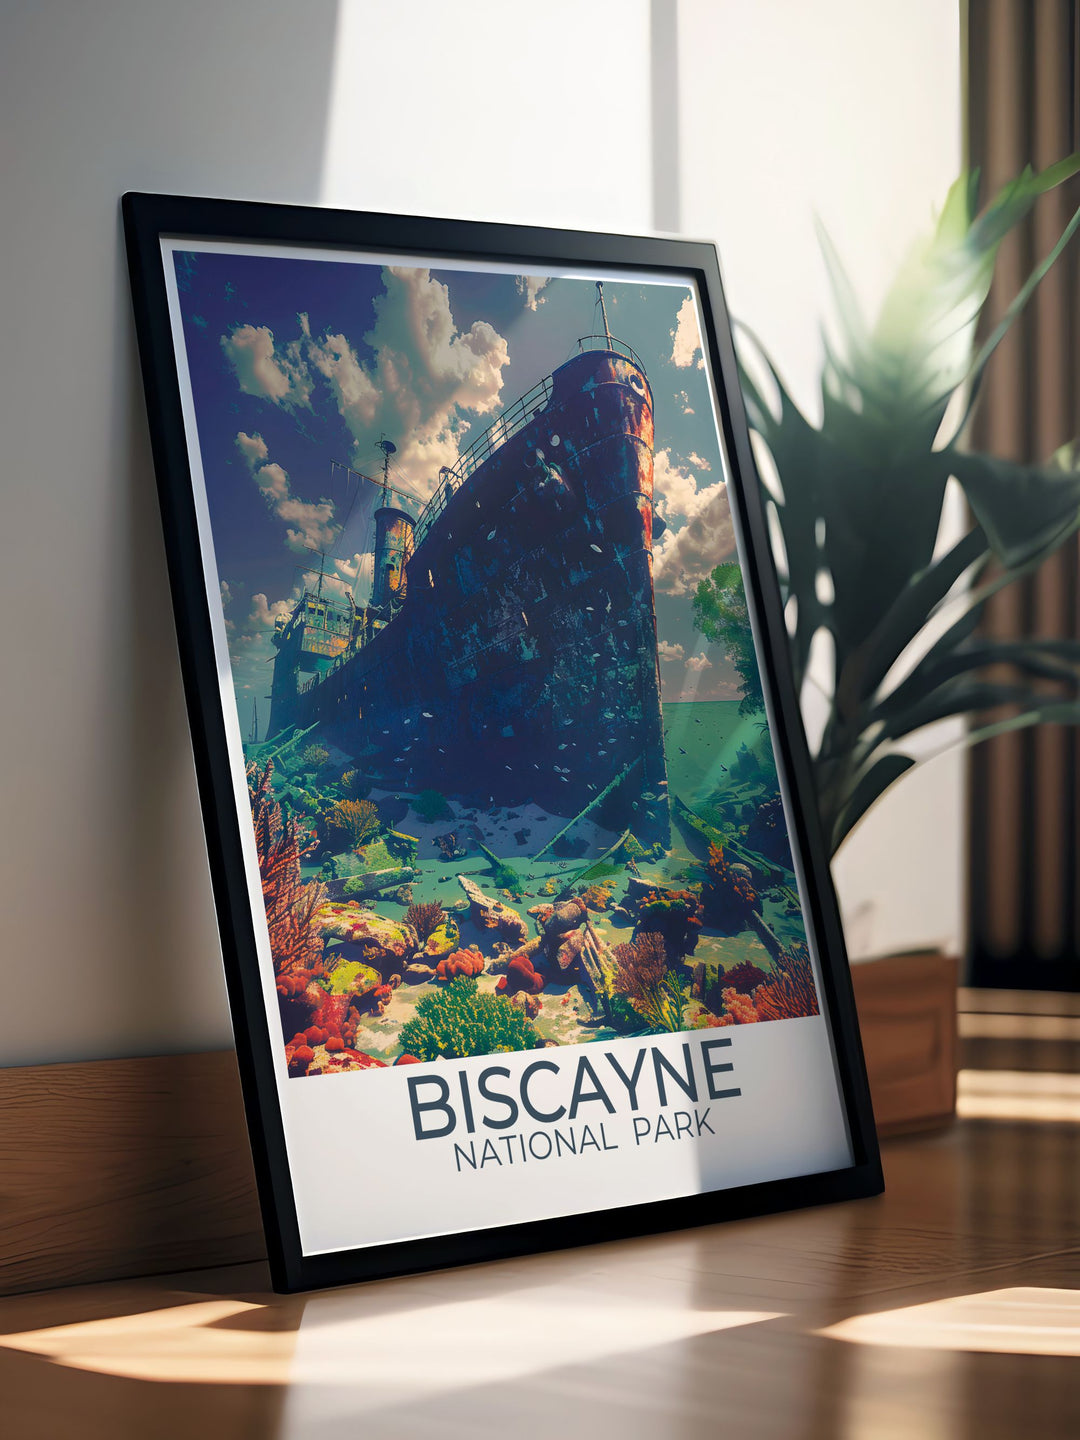 Unique artwork of Biscayne National Park featuring The Maritime Heritage Trail and coral reefs, perfect for personalized gifts or home decor. This print captures the essence of Floridas most scenic national park.